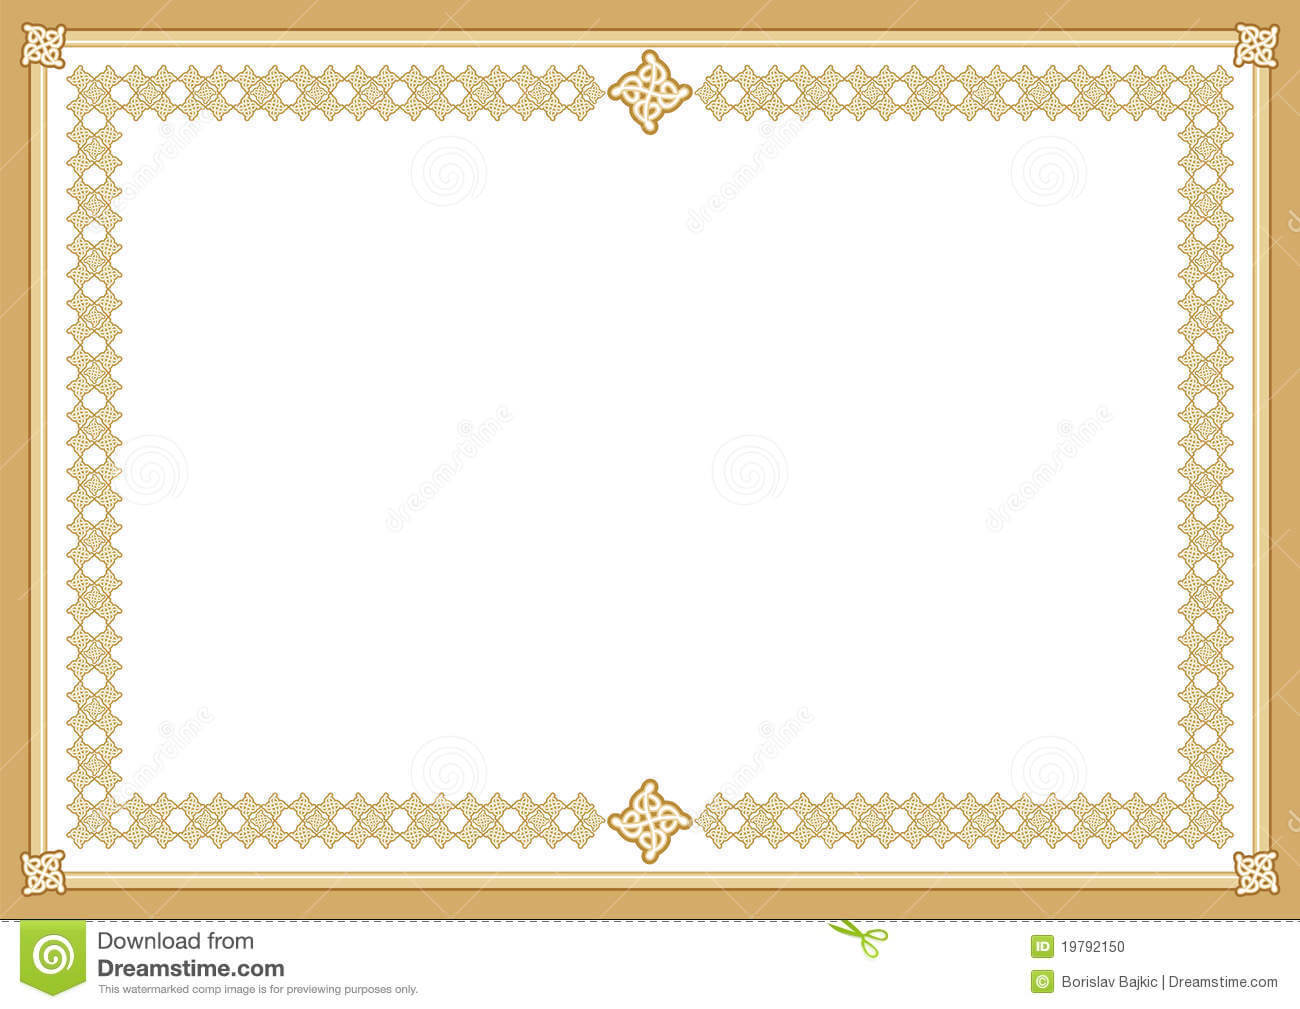 Certificate Stock Vector. Illustration Of Award, Blank With Award Certificate Border Template